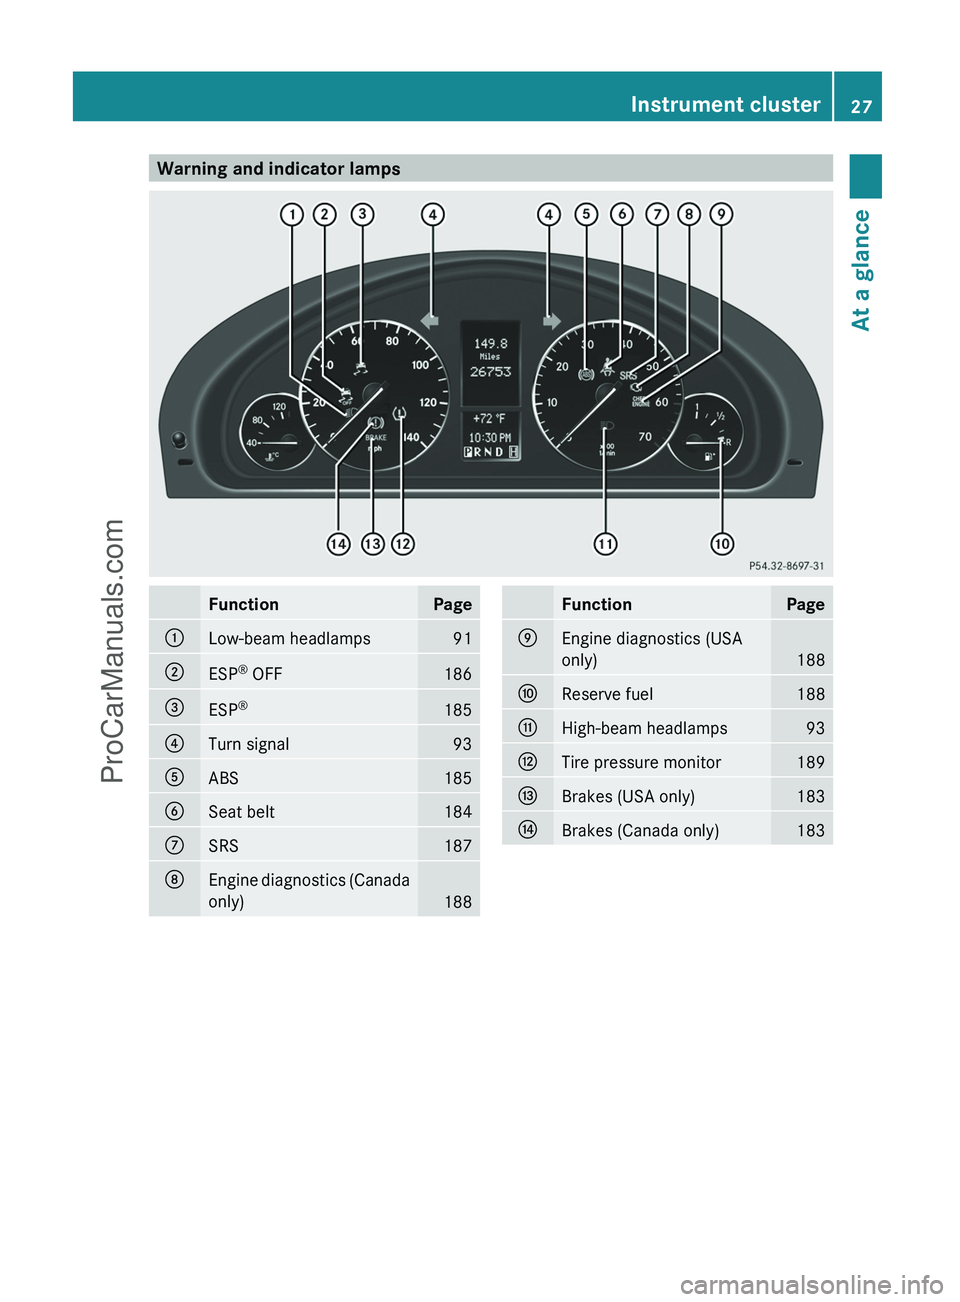 MERCEDES-BENZ G-CLASS 2011  Owners Manual Warning and indicator lampsFunctionPage:Low-beam headlamps91;ESP®
 OFF186=ESP ®185?Turn signal93AABS185BSeat belt184CSRS187DEngine diagnostics (Canada
only)
188
FunctionPageEEngine diagnostics (USA
